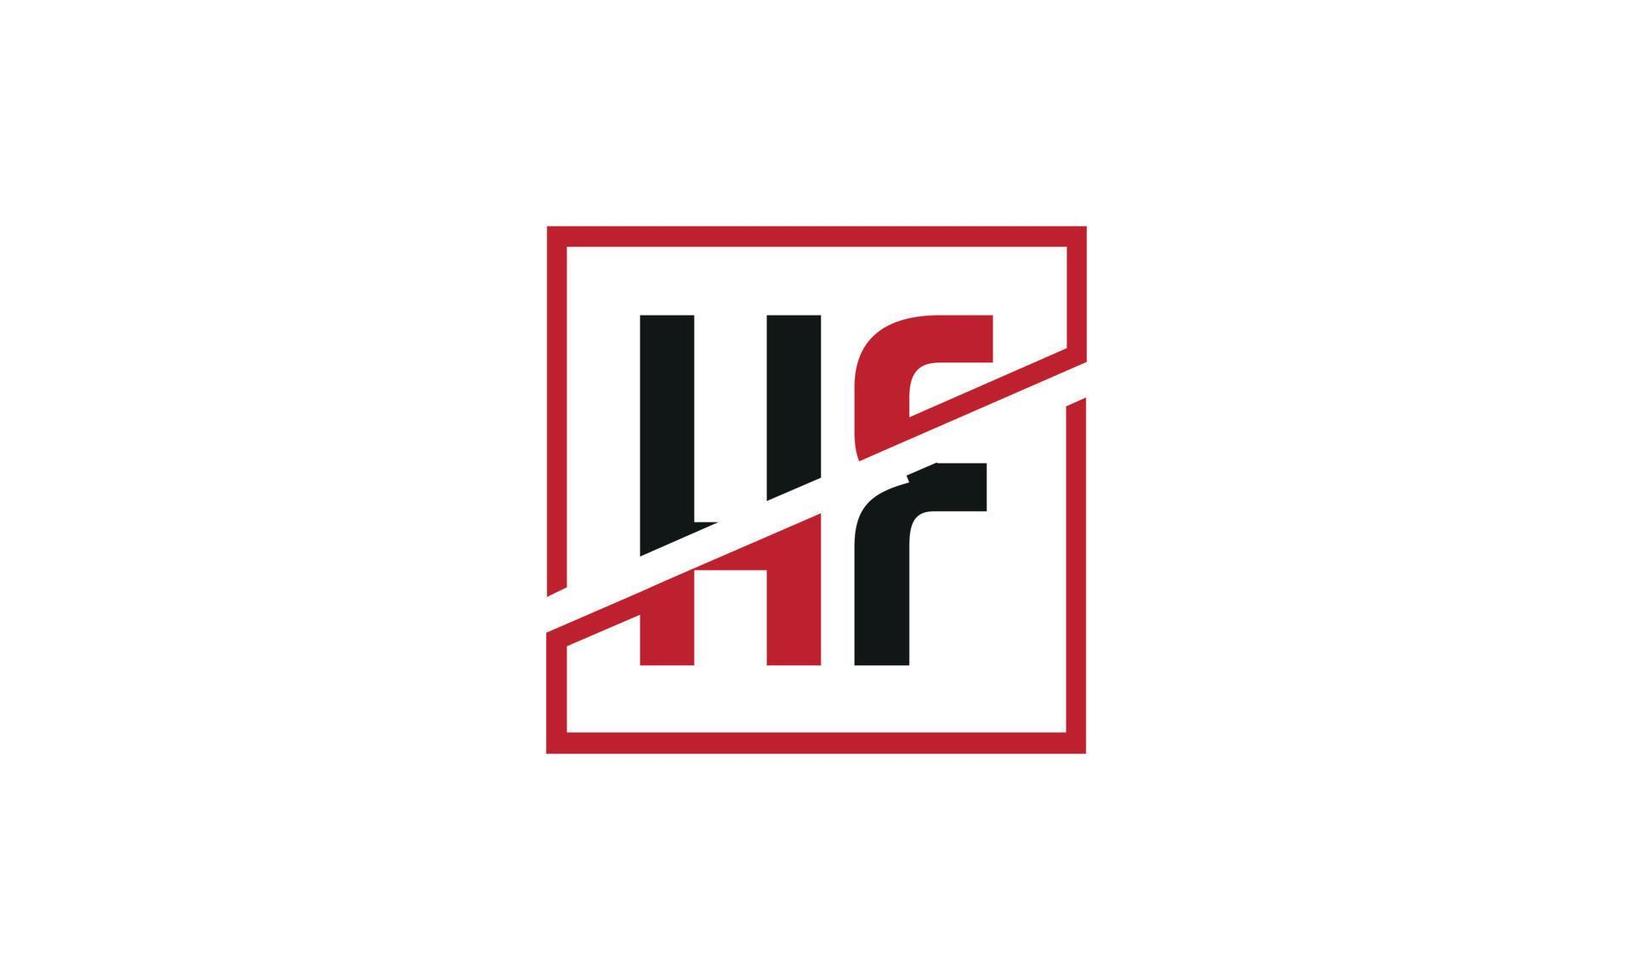 HF logo design. Initial HF letter logo monogram design in black and red color with square shape. Pro vector